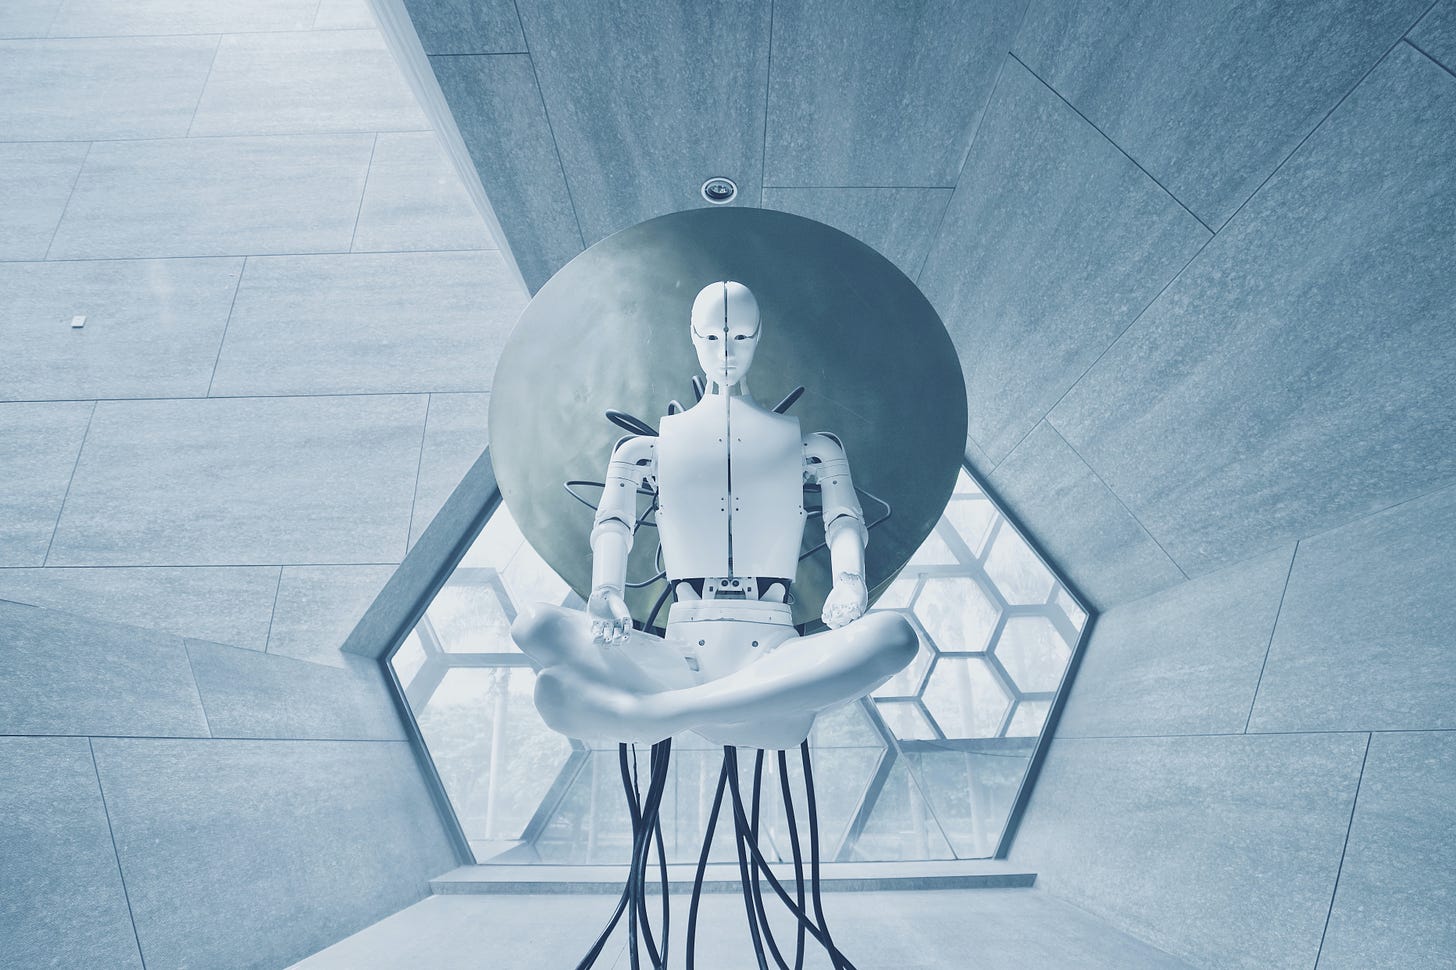 A futuristic white and metal laboratory. In the middle is a human/ robot in a pod and there are wires connected underneath.